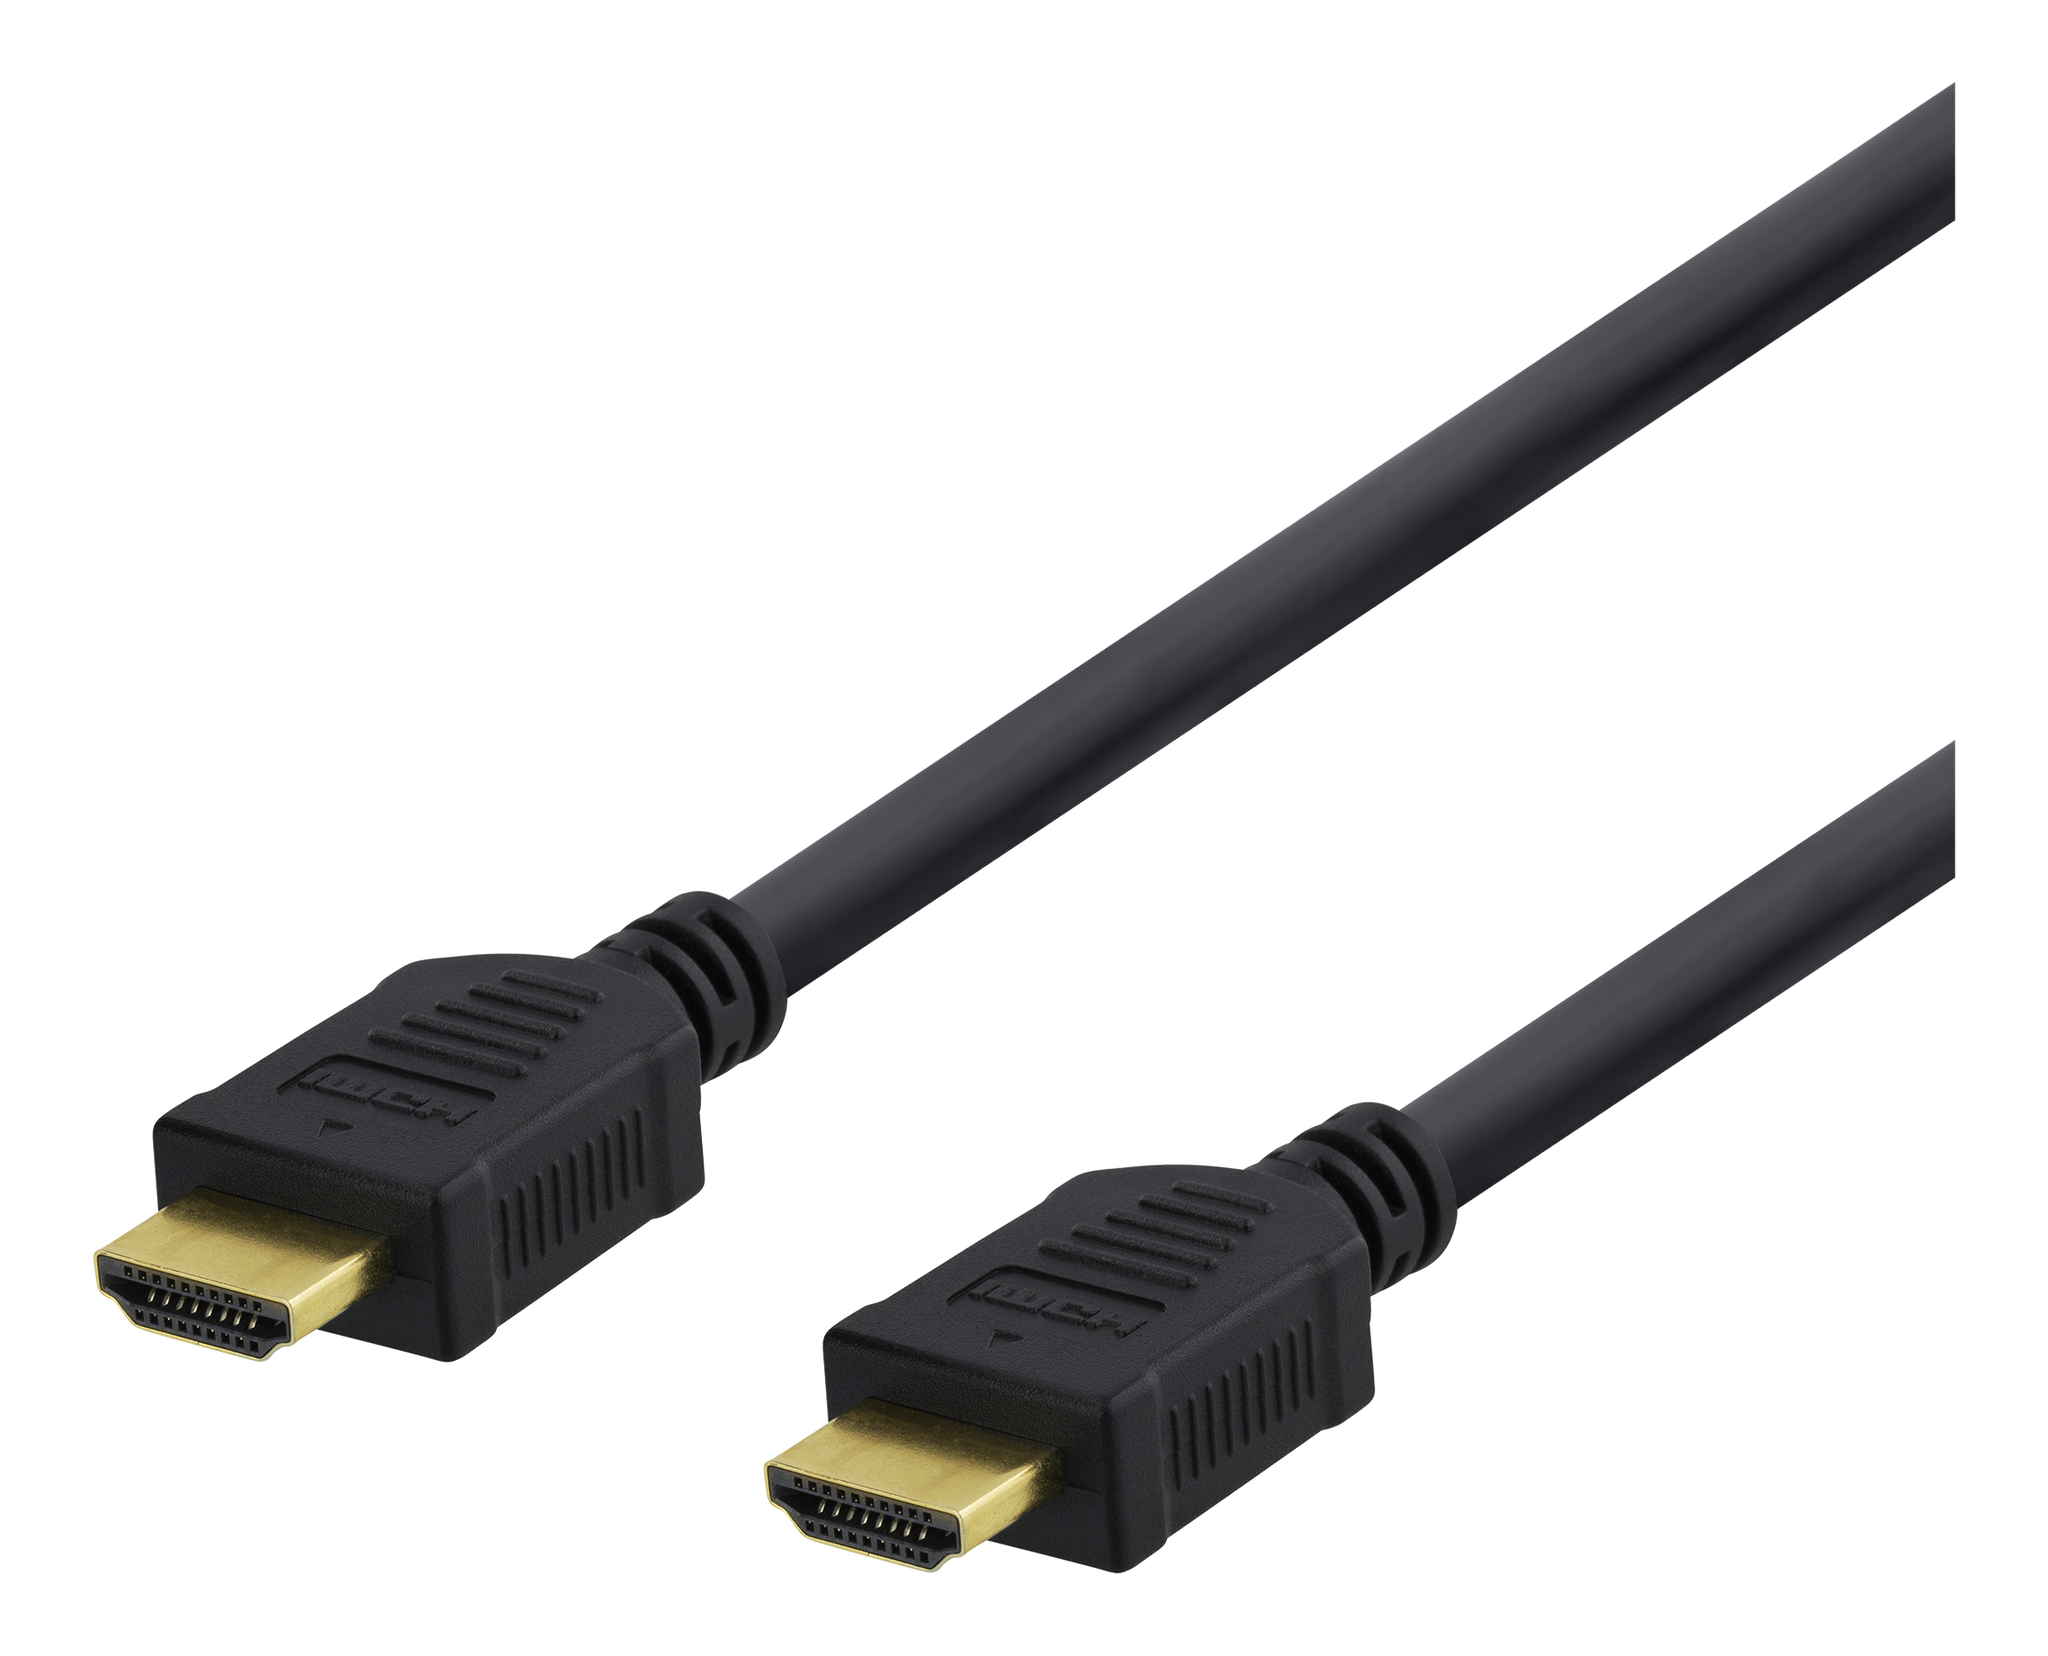 Deltaco High-Speed Premium HDMI cable, 1 m, Ethernet, 4K UHD, black